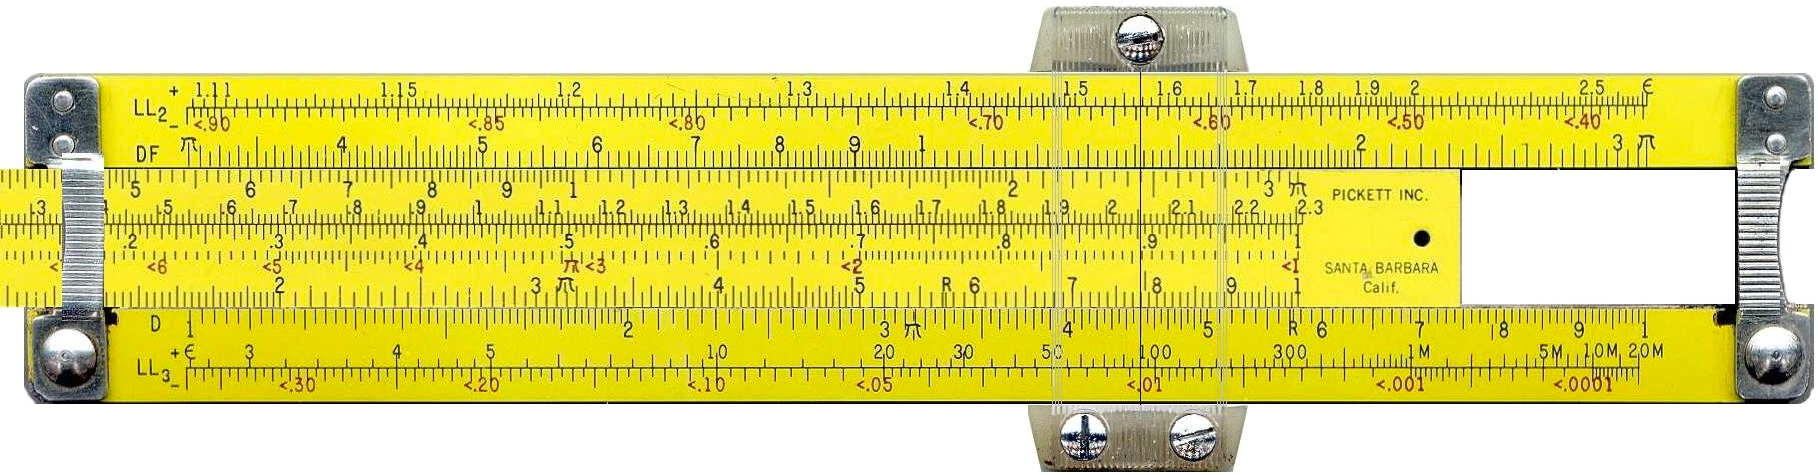 It’s Easier To Tell Time Than Do Maths On This Slide Rule Watch